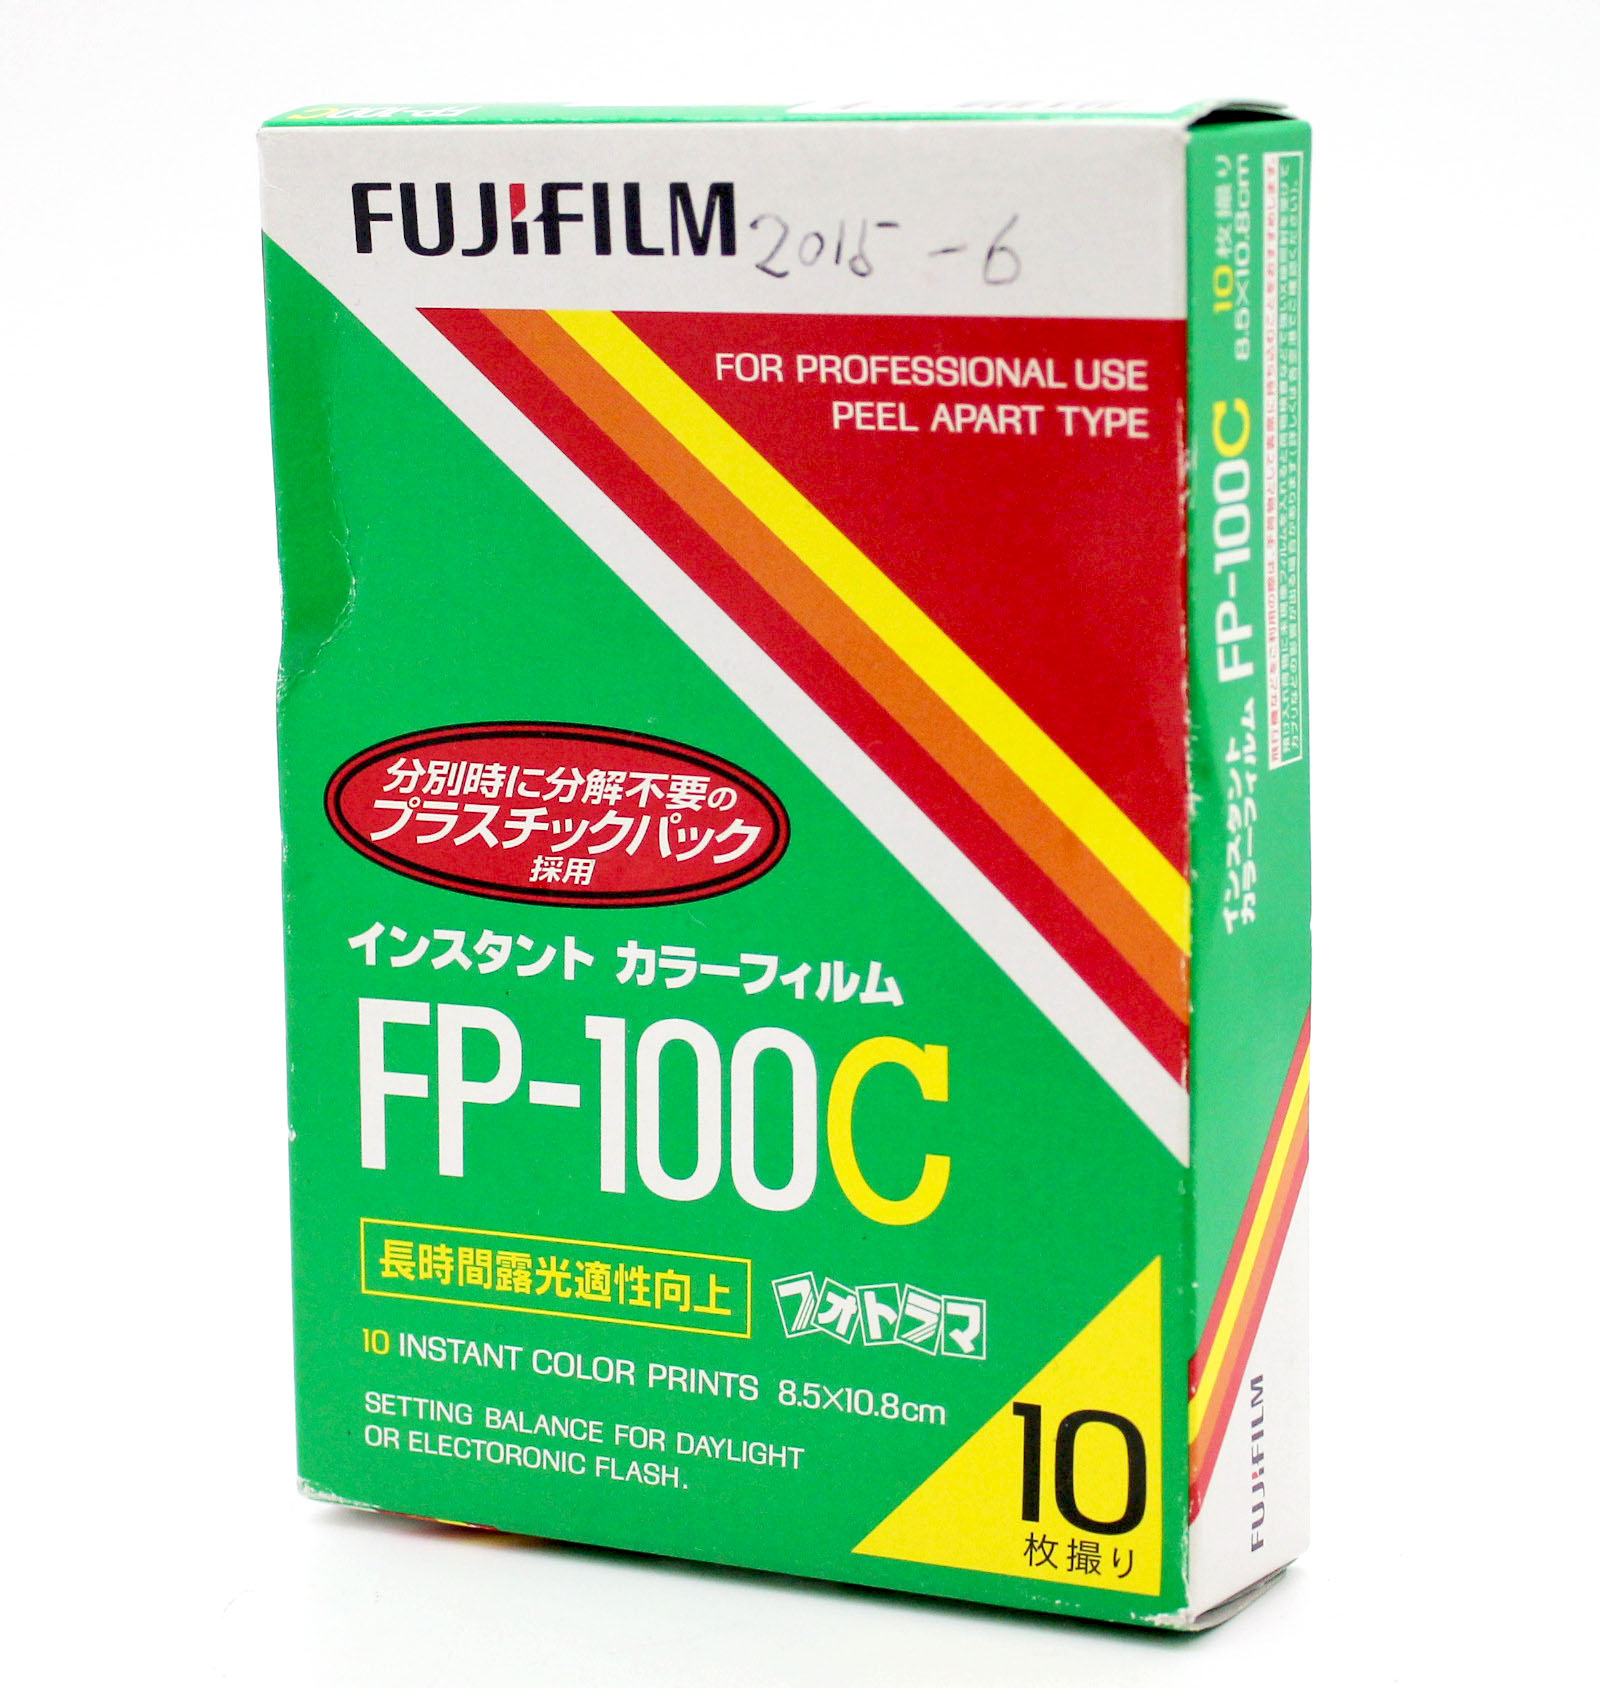 Japan Used Camera Shop | [New] Fujifilm FP-100C Professional Instant Color Film (Expired 6/2015) from Japan